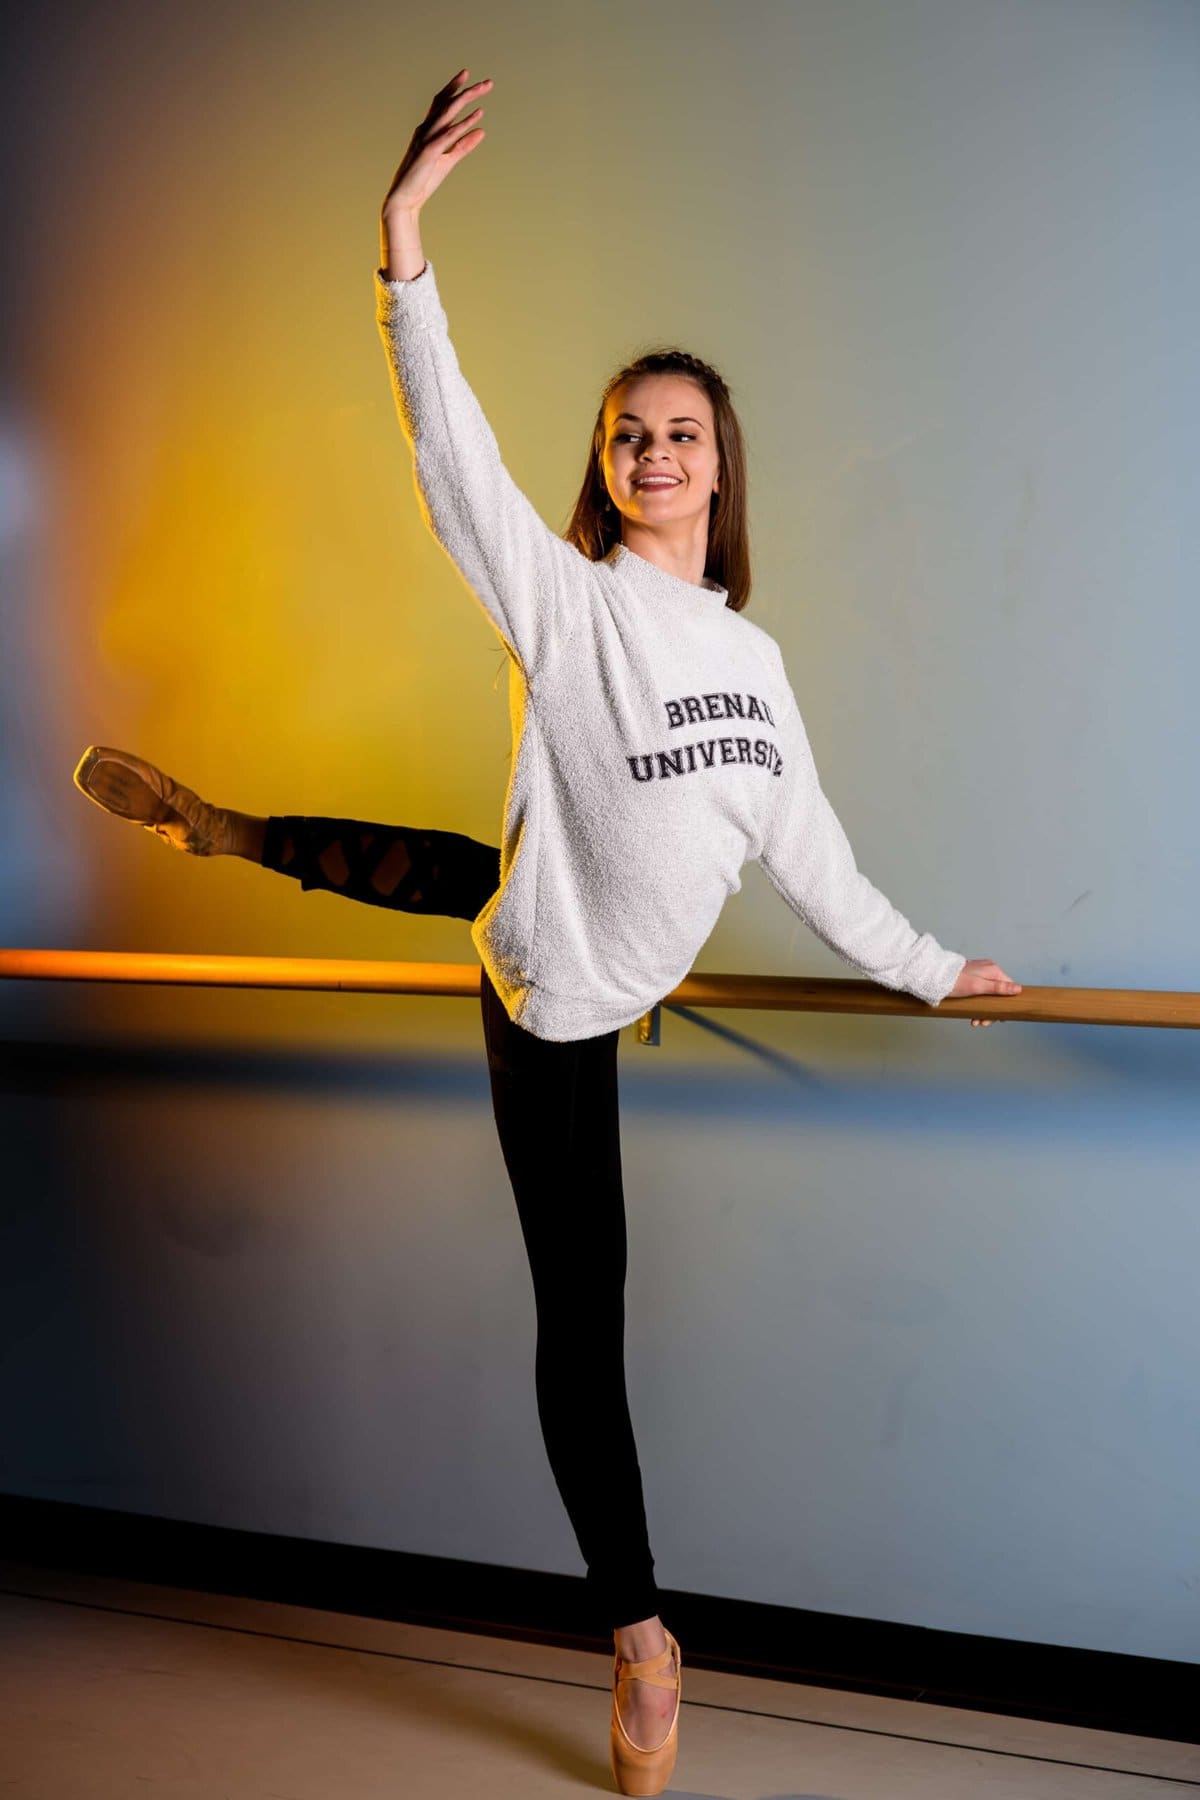 Sarah Owens is a dance and pre-occupational therapy students from St. Augustine, Fla. (AJ Reynolds/Brenau University)